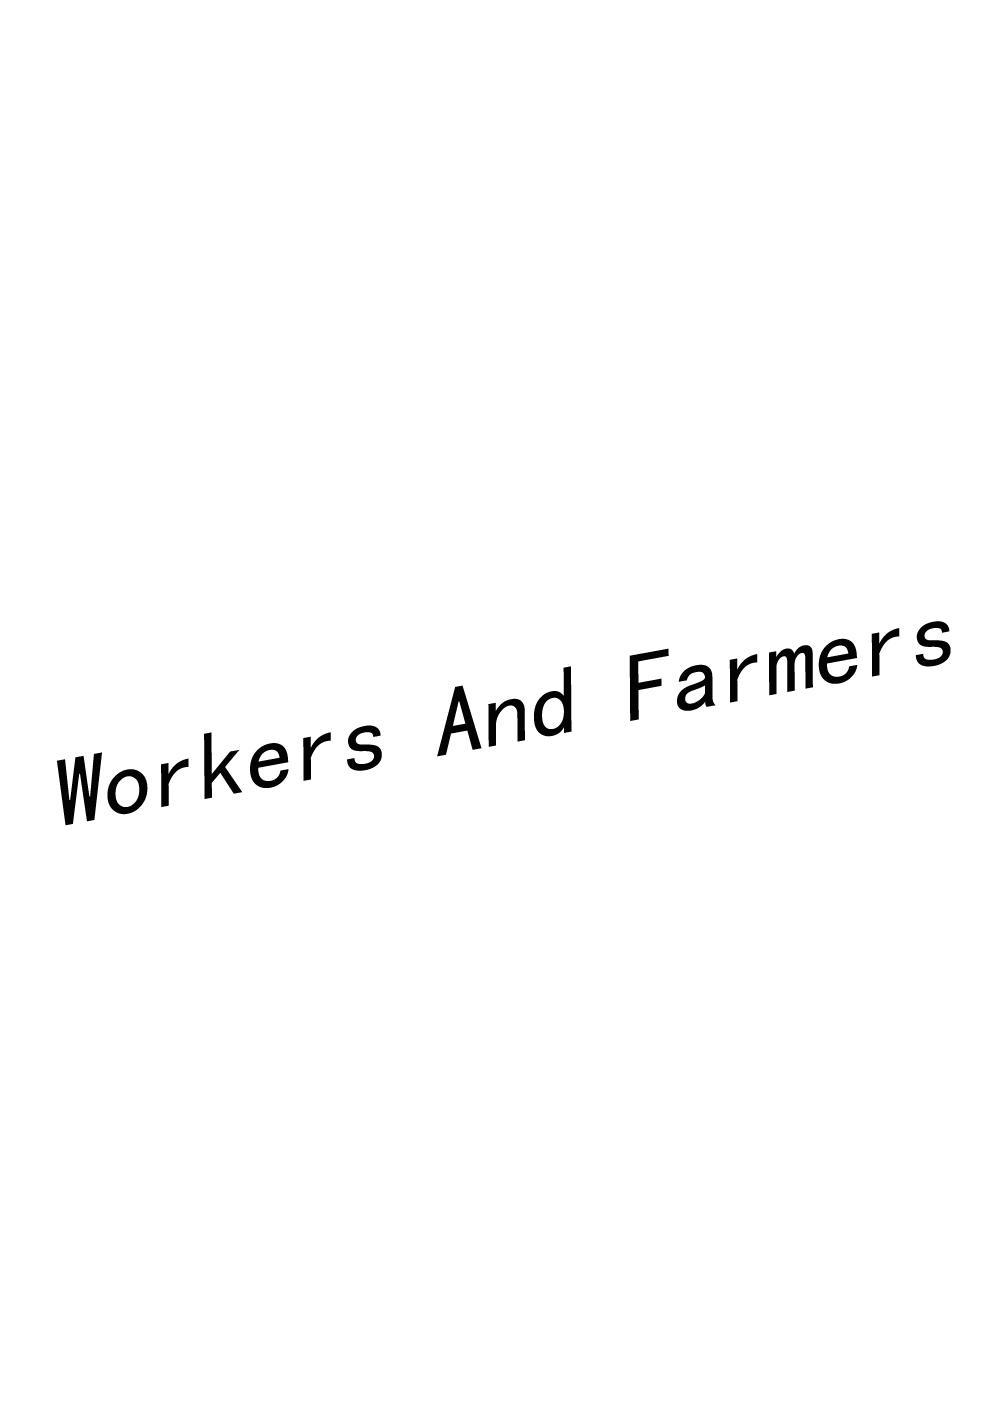 WORKERS AND FARMERS